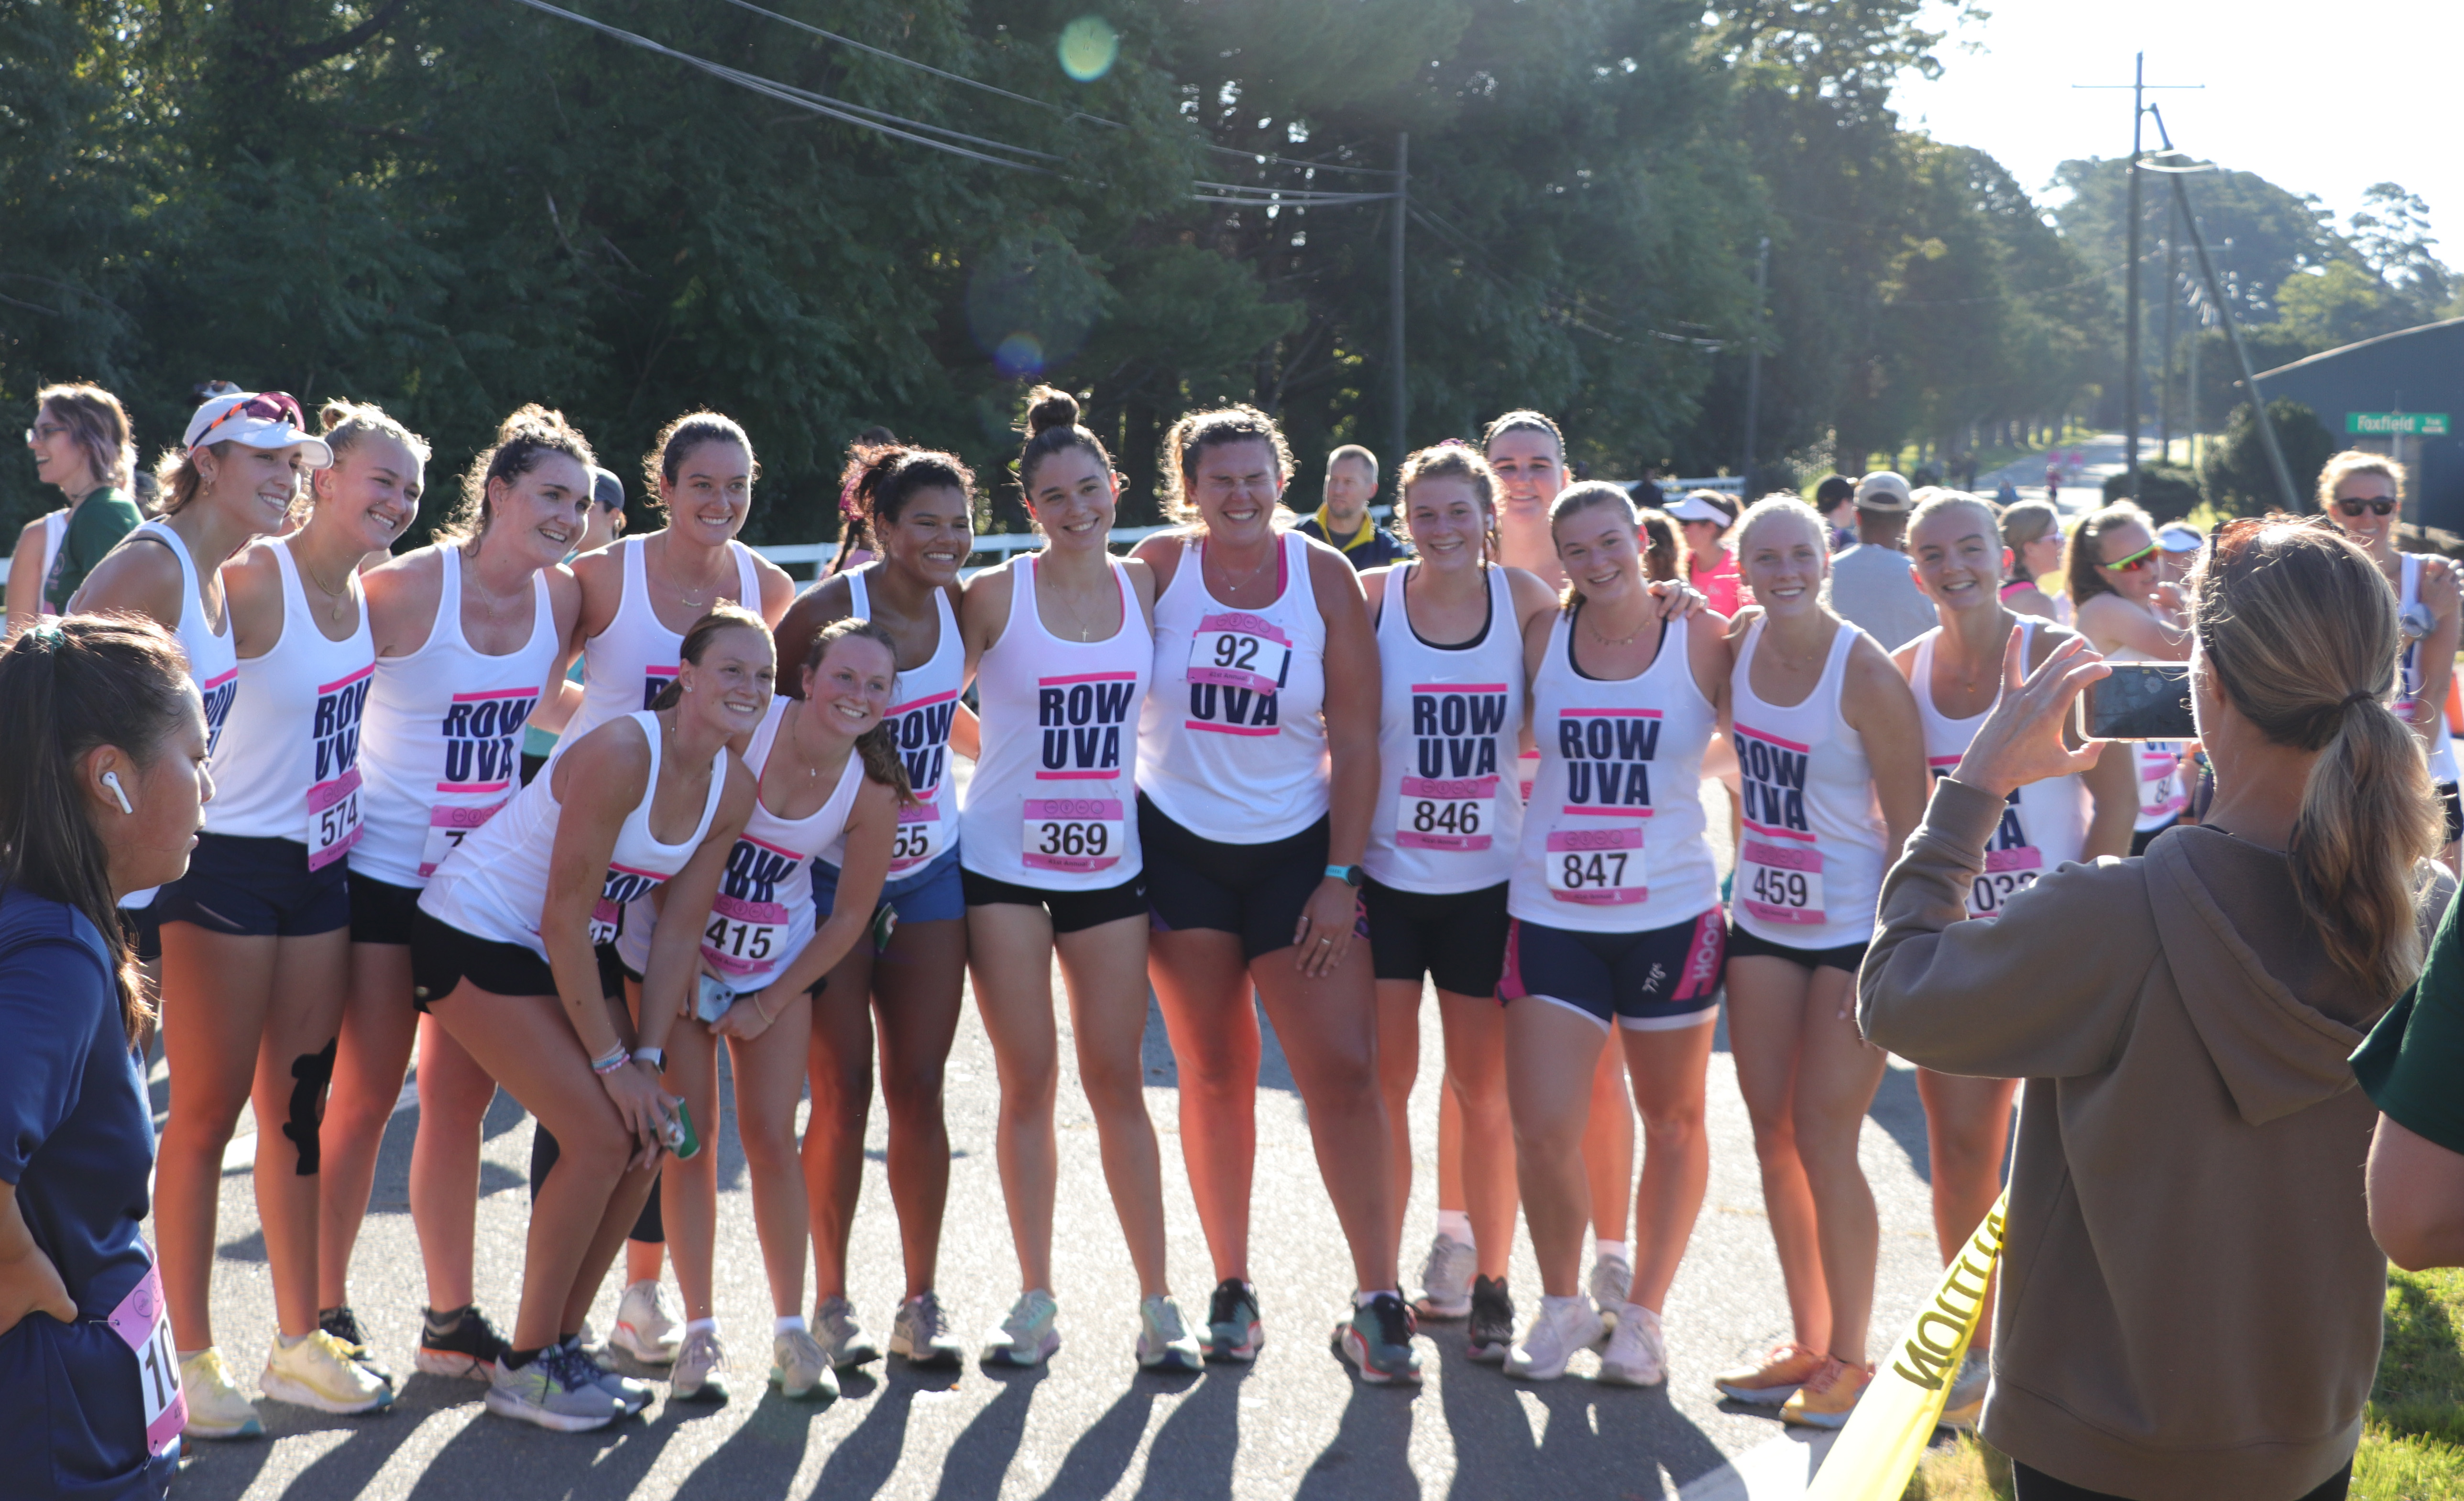 a group of girls on the UVA rowing team stand side by side for a photo